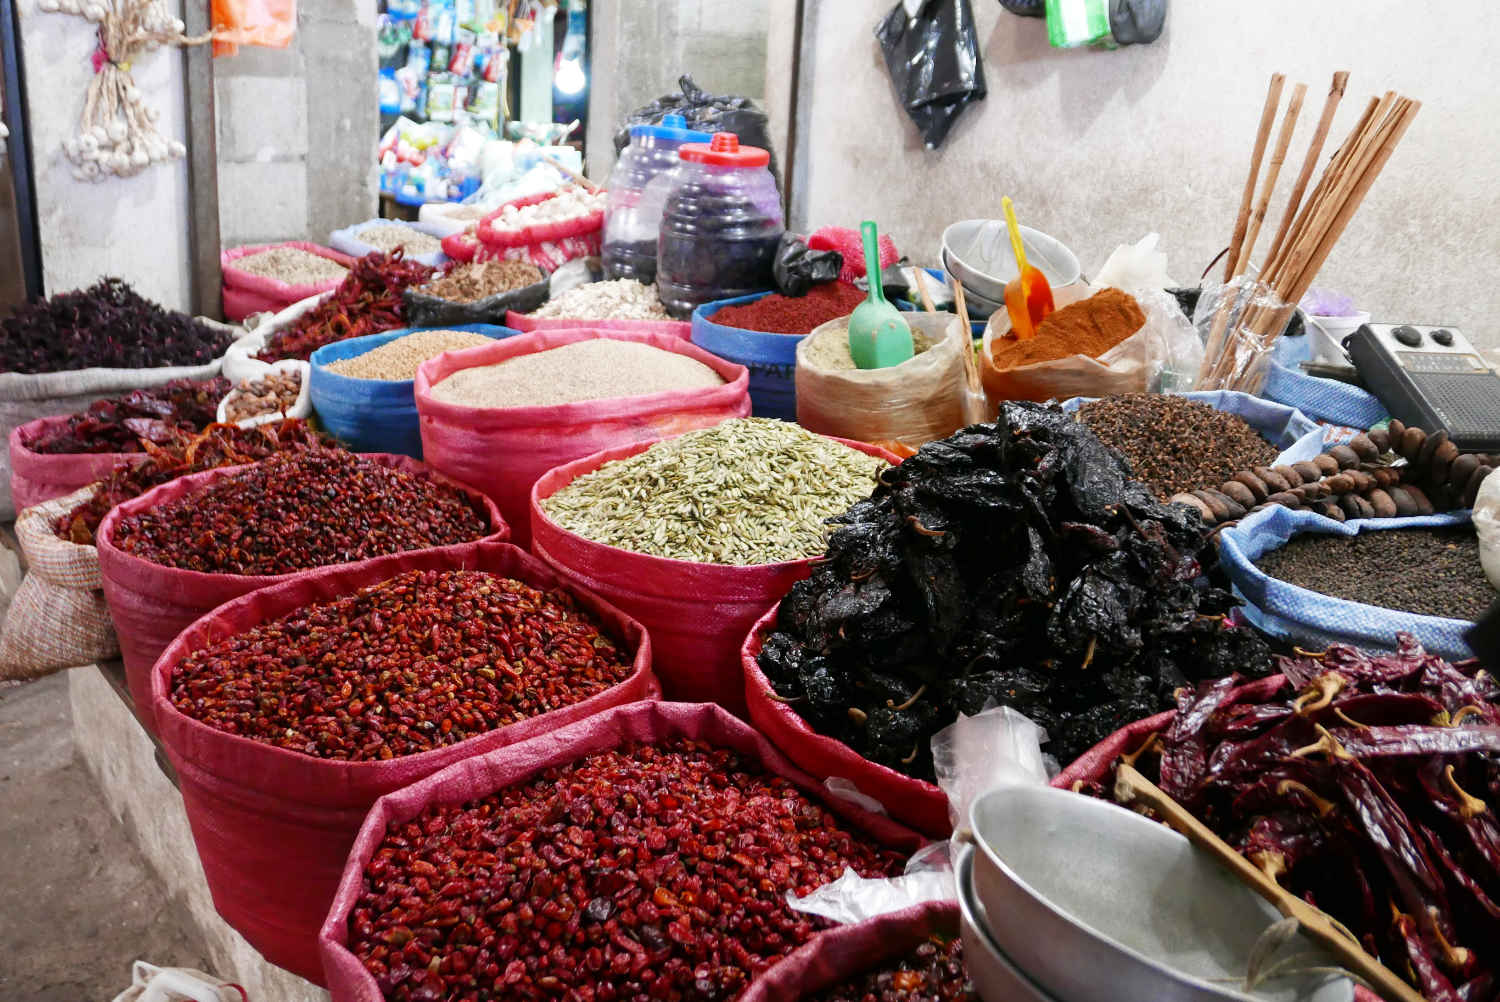 Spices and ingredients (coffee in red!) in Minerva market in Xela